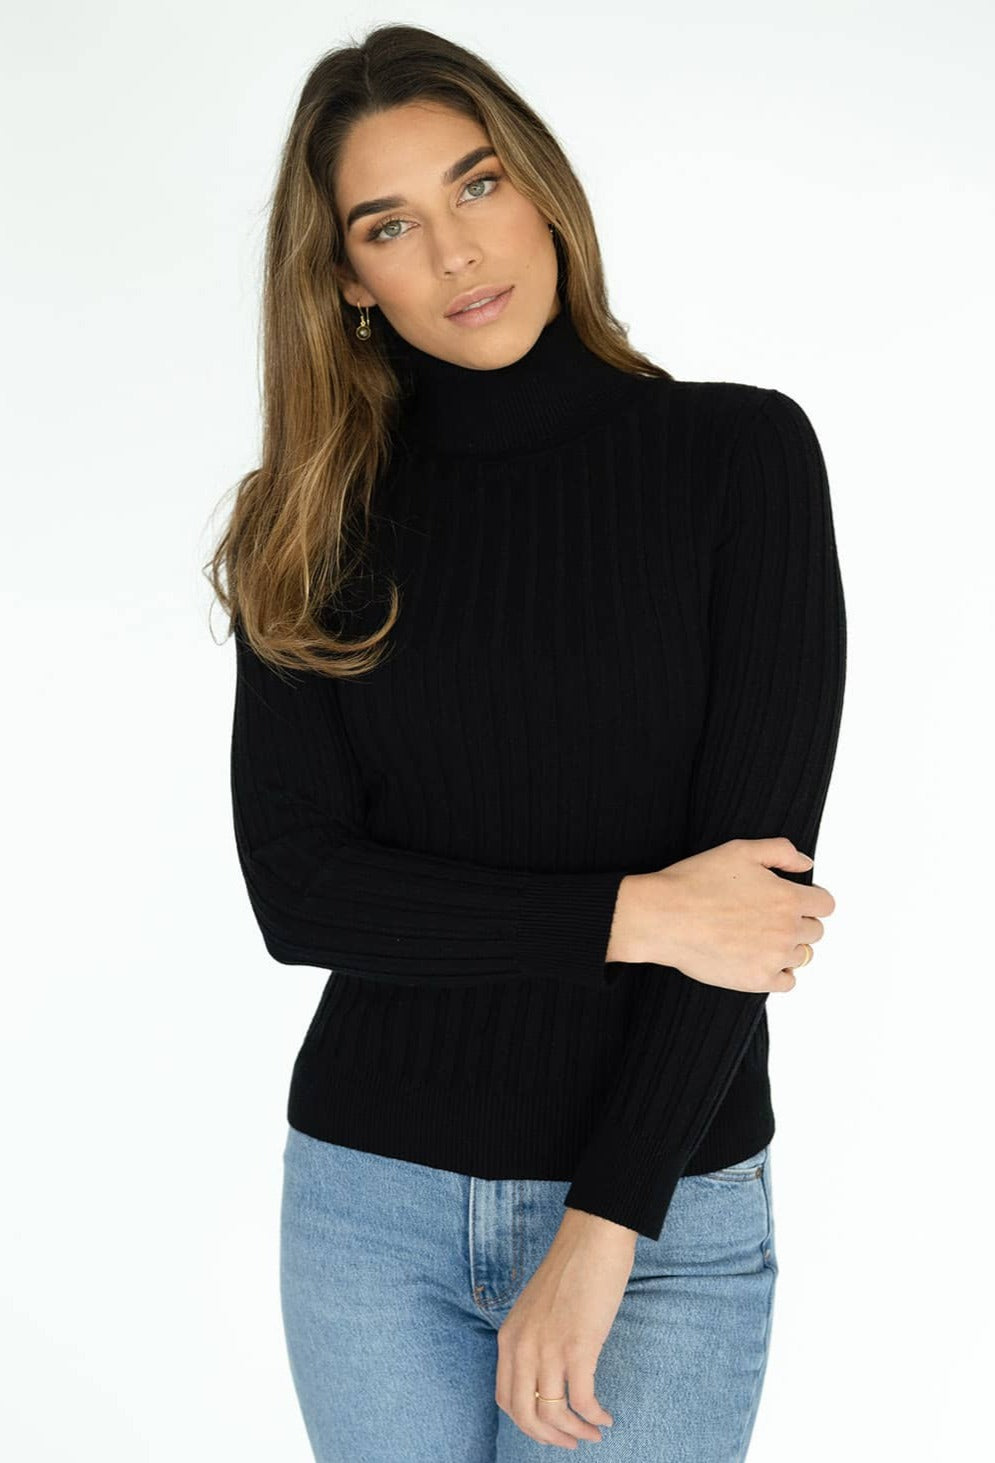 HUMIDITY INES SKIVVY  The Humidity Ines Skivvy is now available in Mocha and Black. It is crafted in a viscose/nylon/polyester blend which gives a super soft feel on the skin. It is a perfect basic high-neck skivvy to layer or wear on its own.       Sizes: XS, S, M, L     50% Viscose/28% Nylon/22% Polyester.     Available in mocha and black